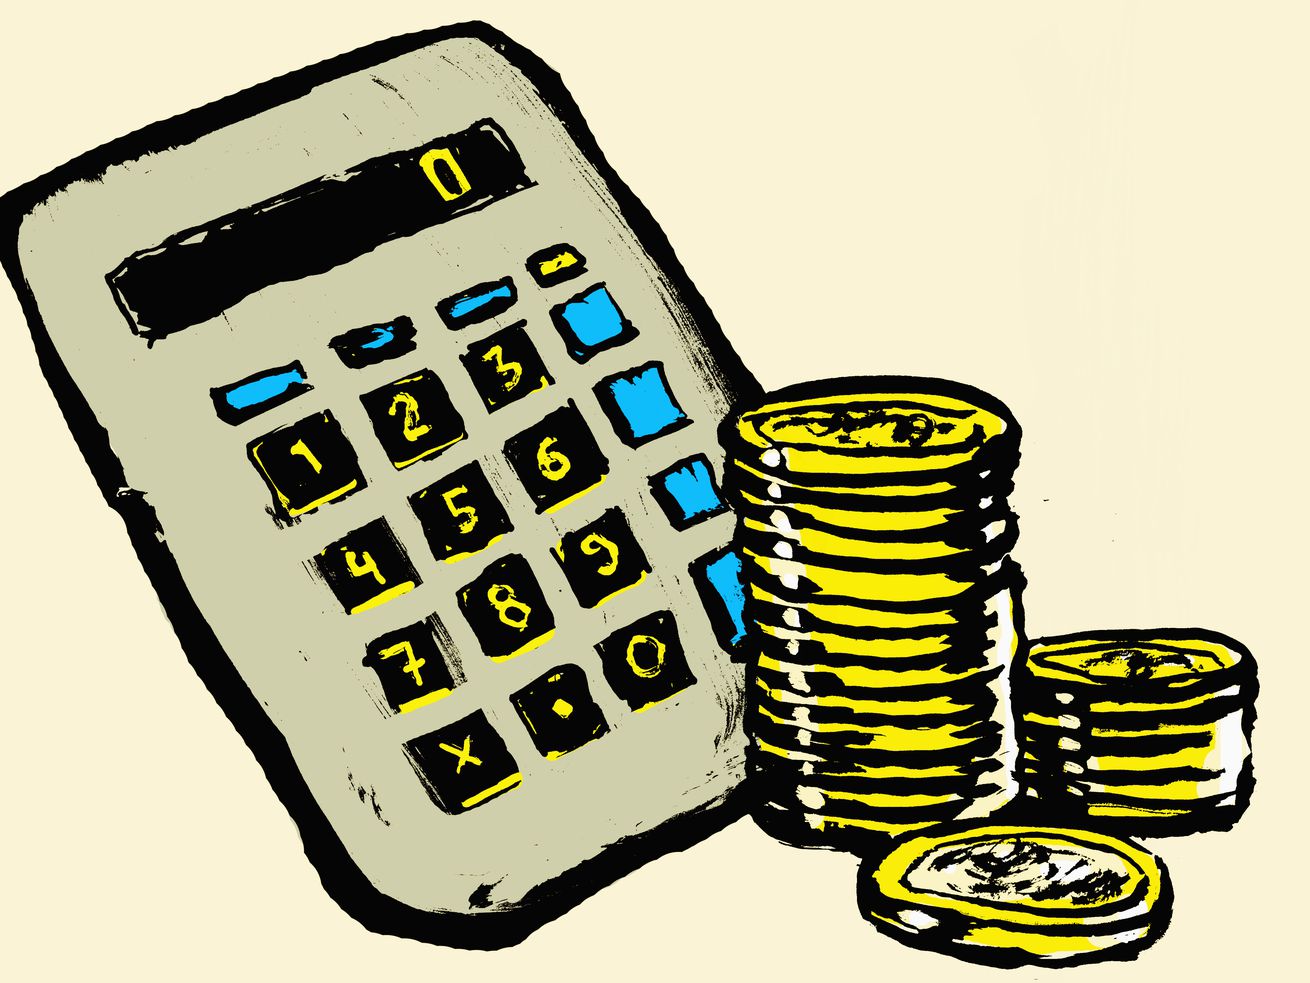 An illustration of an old-school gray calculator and a stack of gold coins.